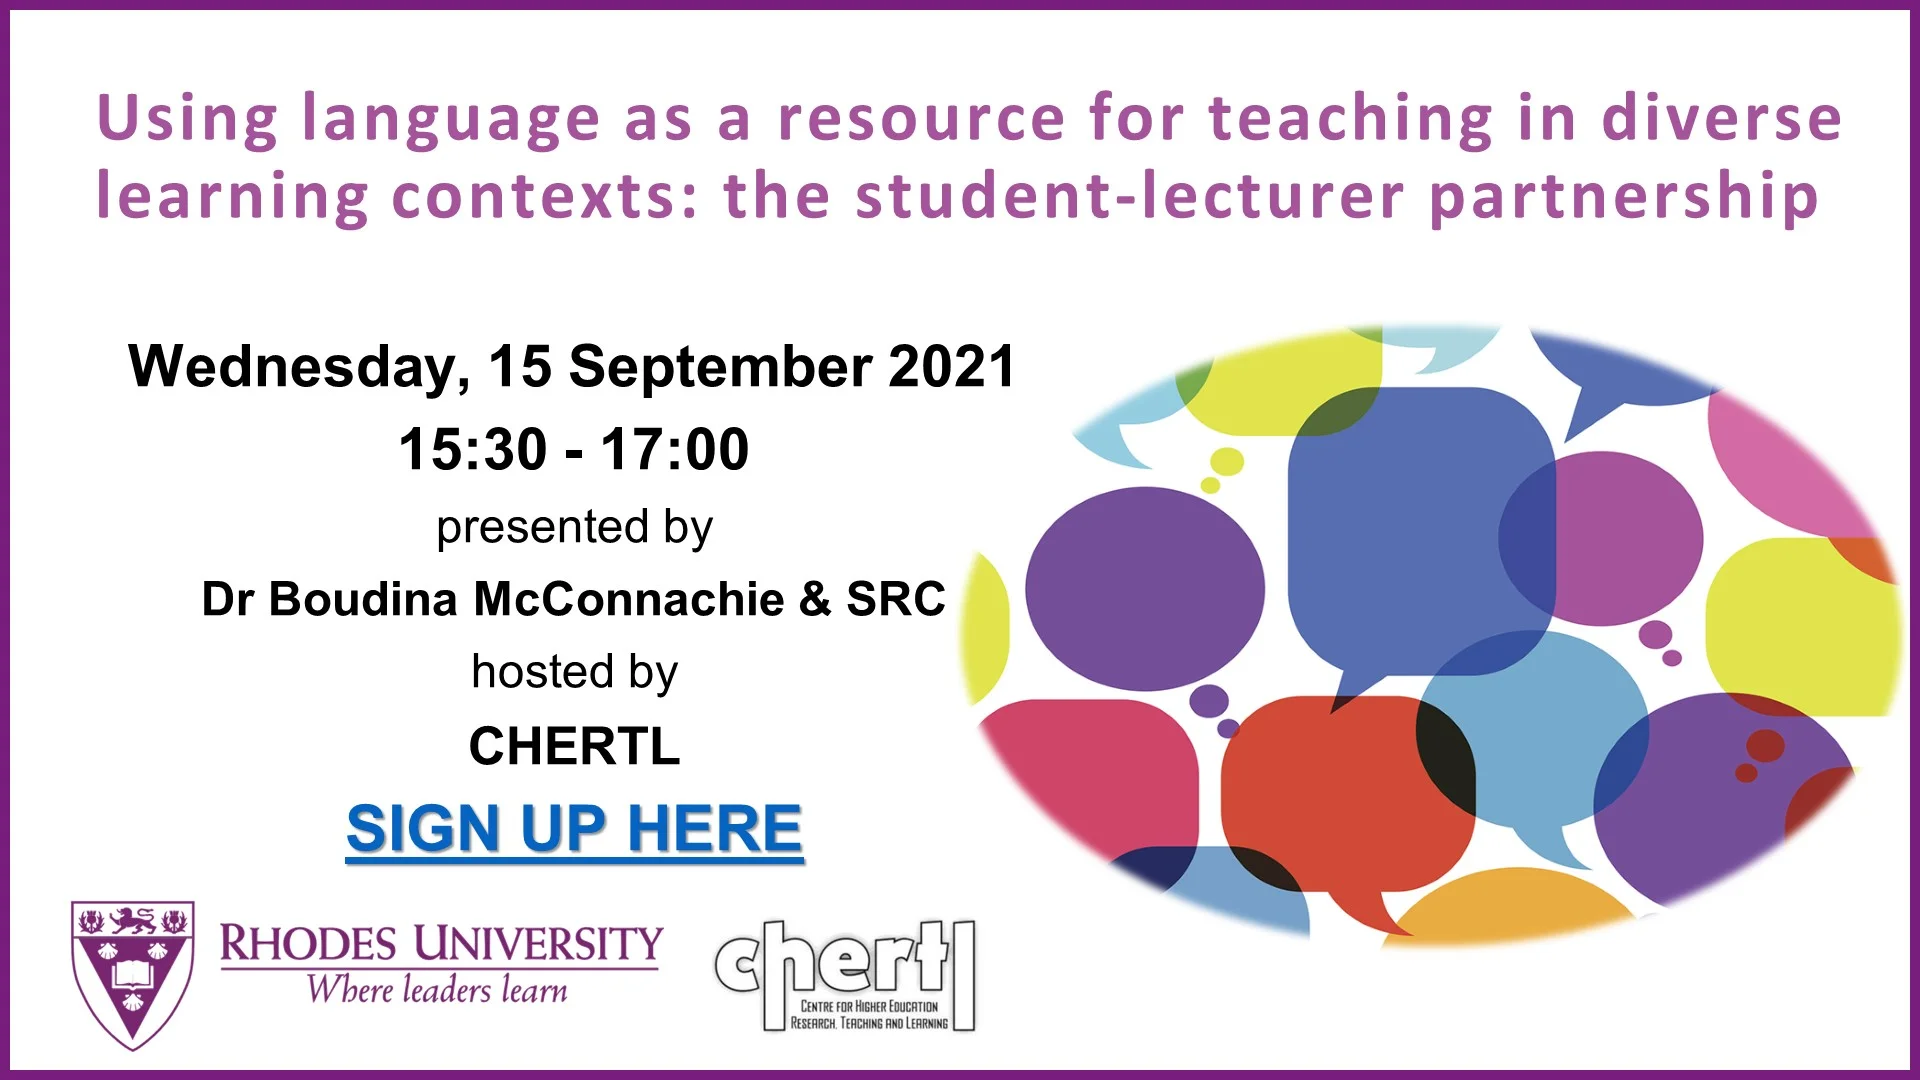 The Centre for Higher Education Research, Teaching, and Learning (CHERTL) hosted an online lecture on Wednesday the 15th of September 2021 for academics, students, and staff interested in using language as a resource for teaching in diverse learning contexts, specifically in the context of the student-lecturer partnership. 